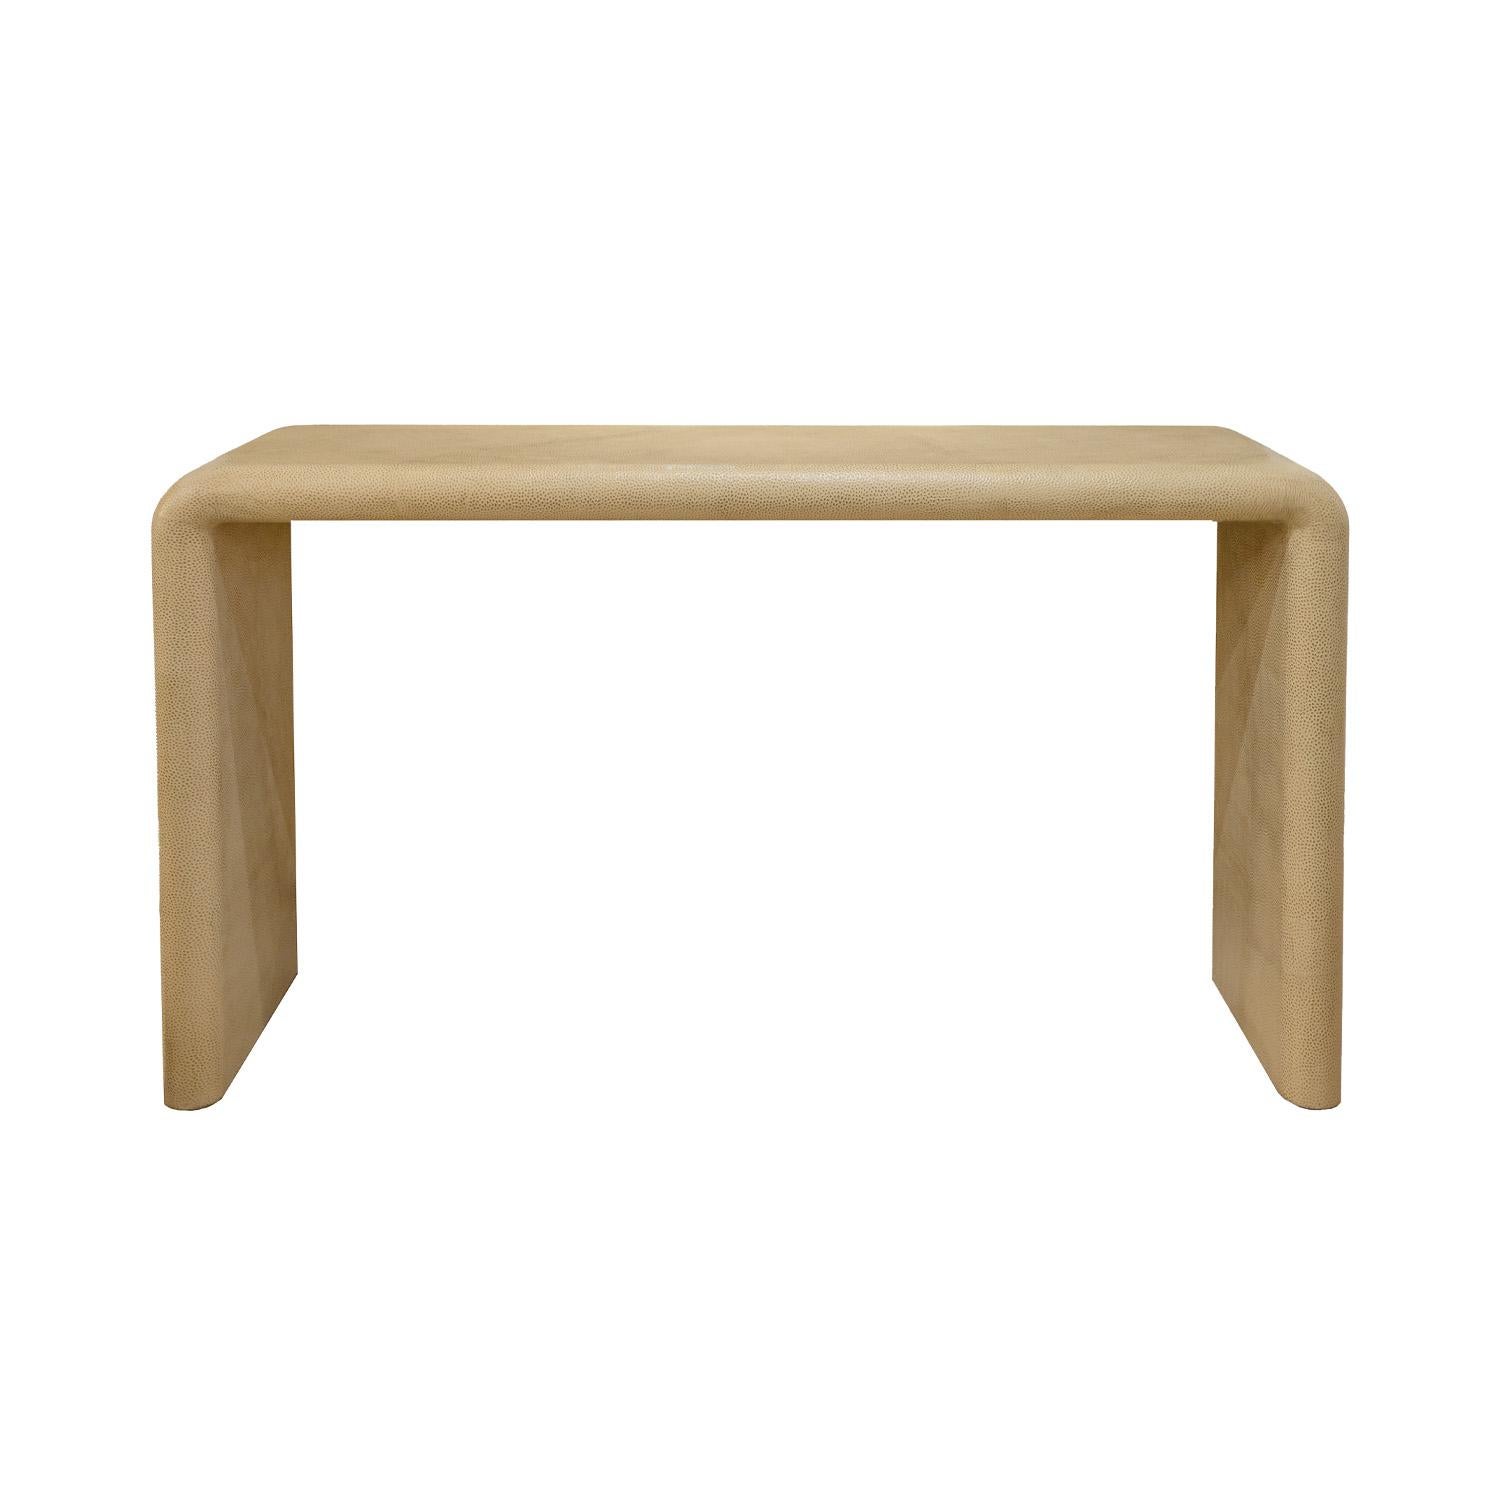 “Curved-End Console Table” in ivory emu skin with gold overlay by Karl Springer, American 1993 (signed “Karl Springer 1993” on the underside of the console). The gold overlay beautifully accents the color of the skins.  The materials and